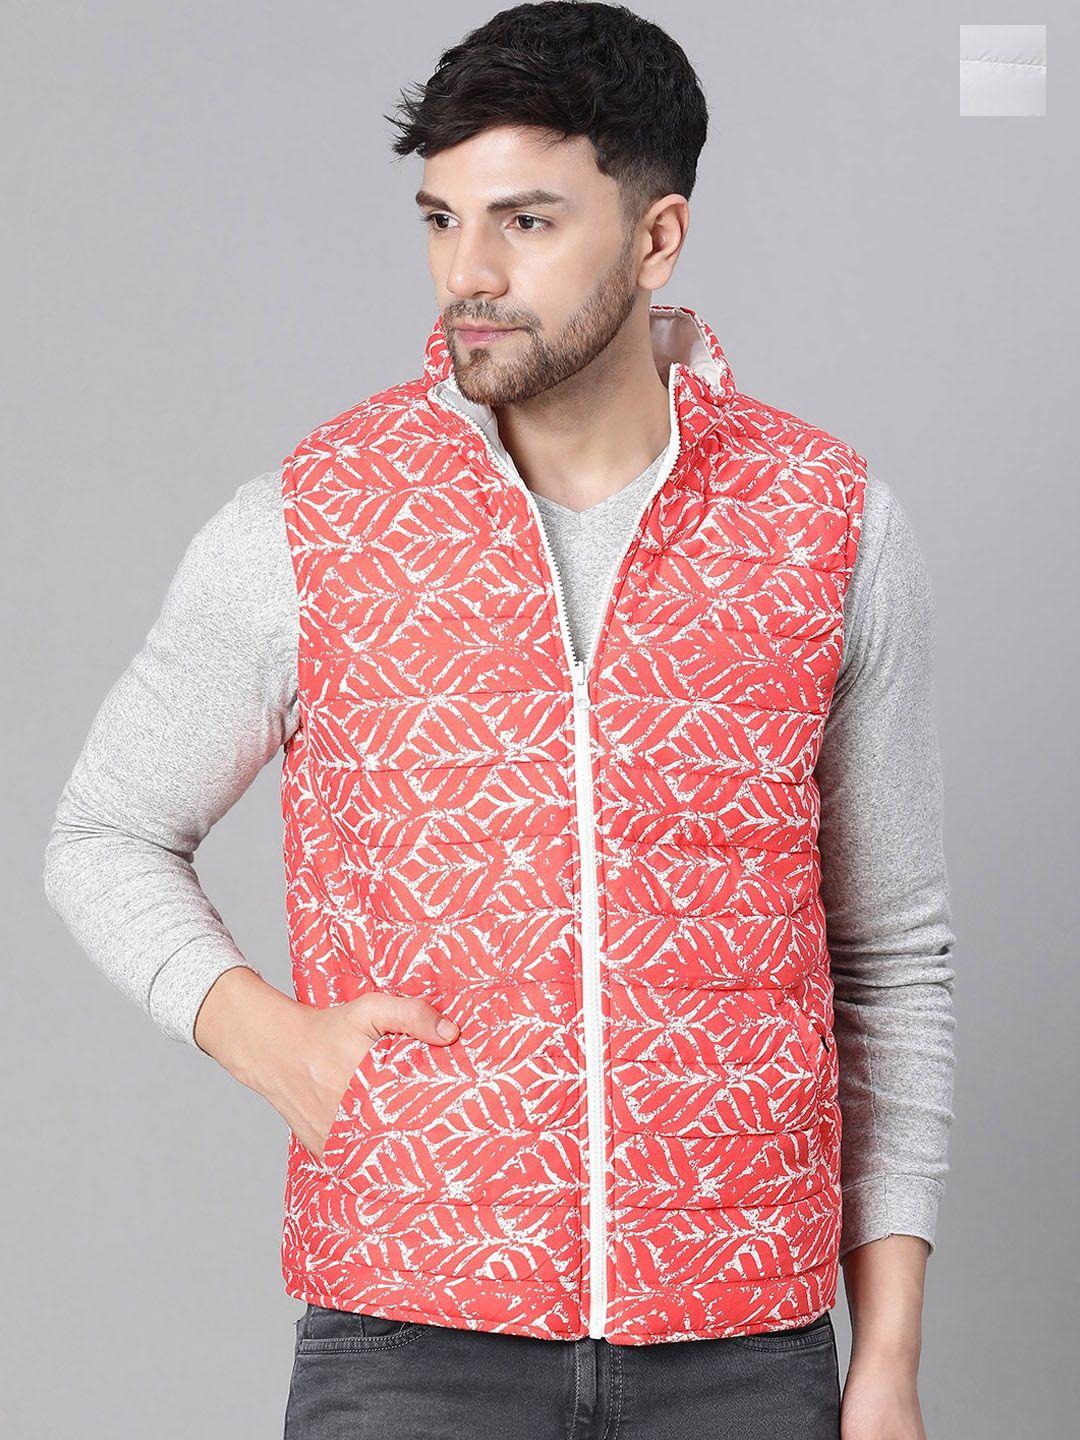 oxolloxo men red floral reversible cycling quilted jacket with